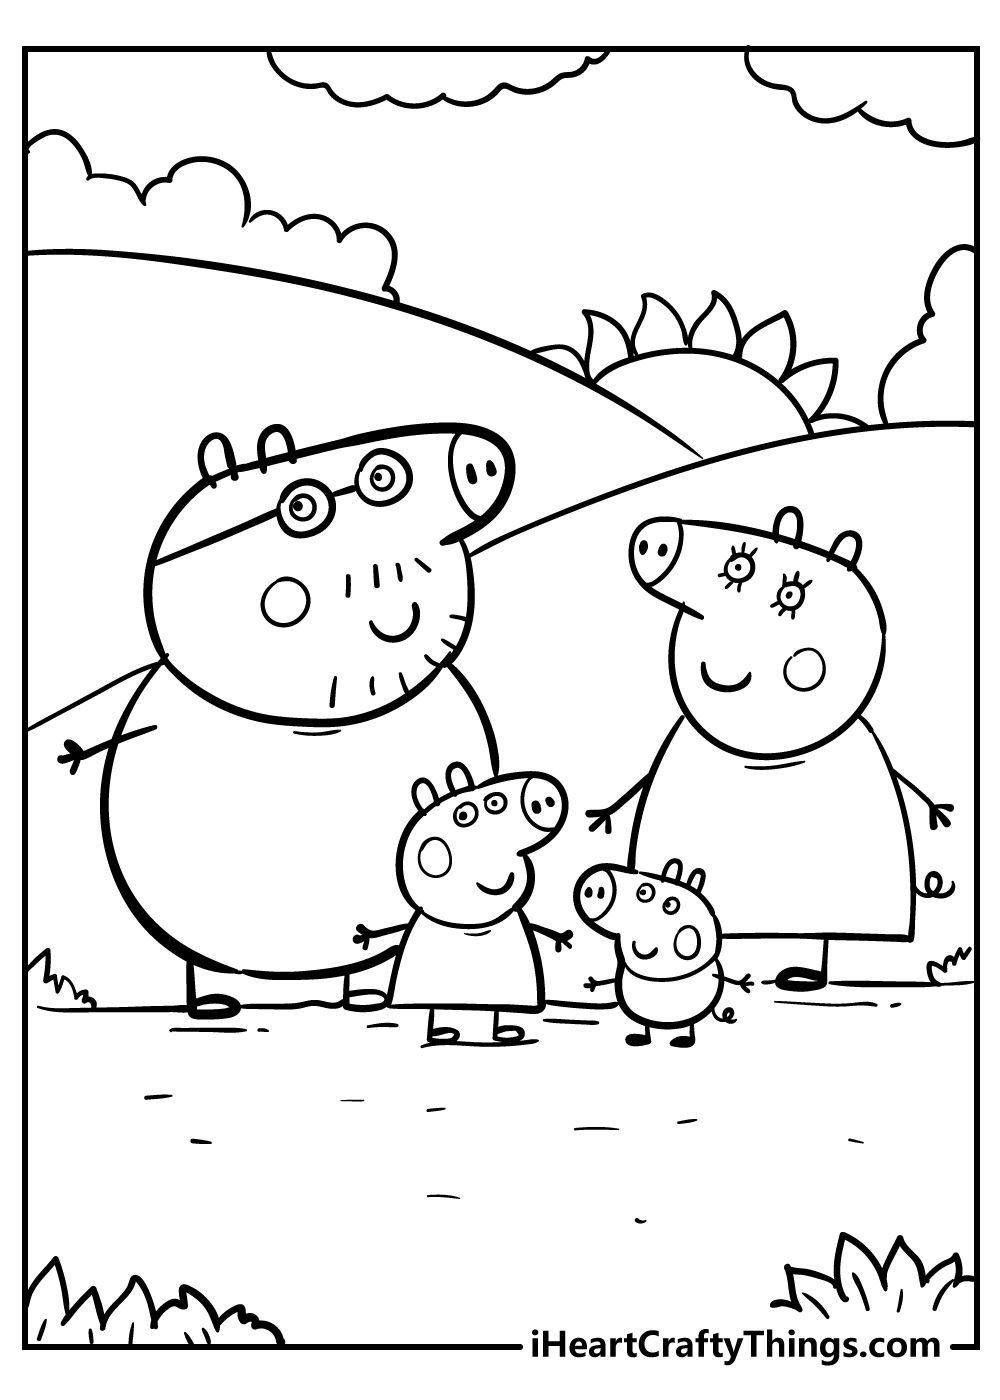 Worlds Coolest Peppa Pig Coloring Book